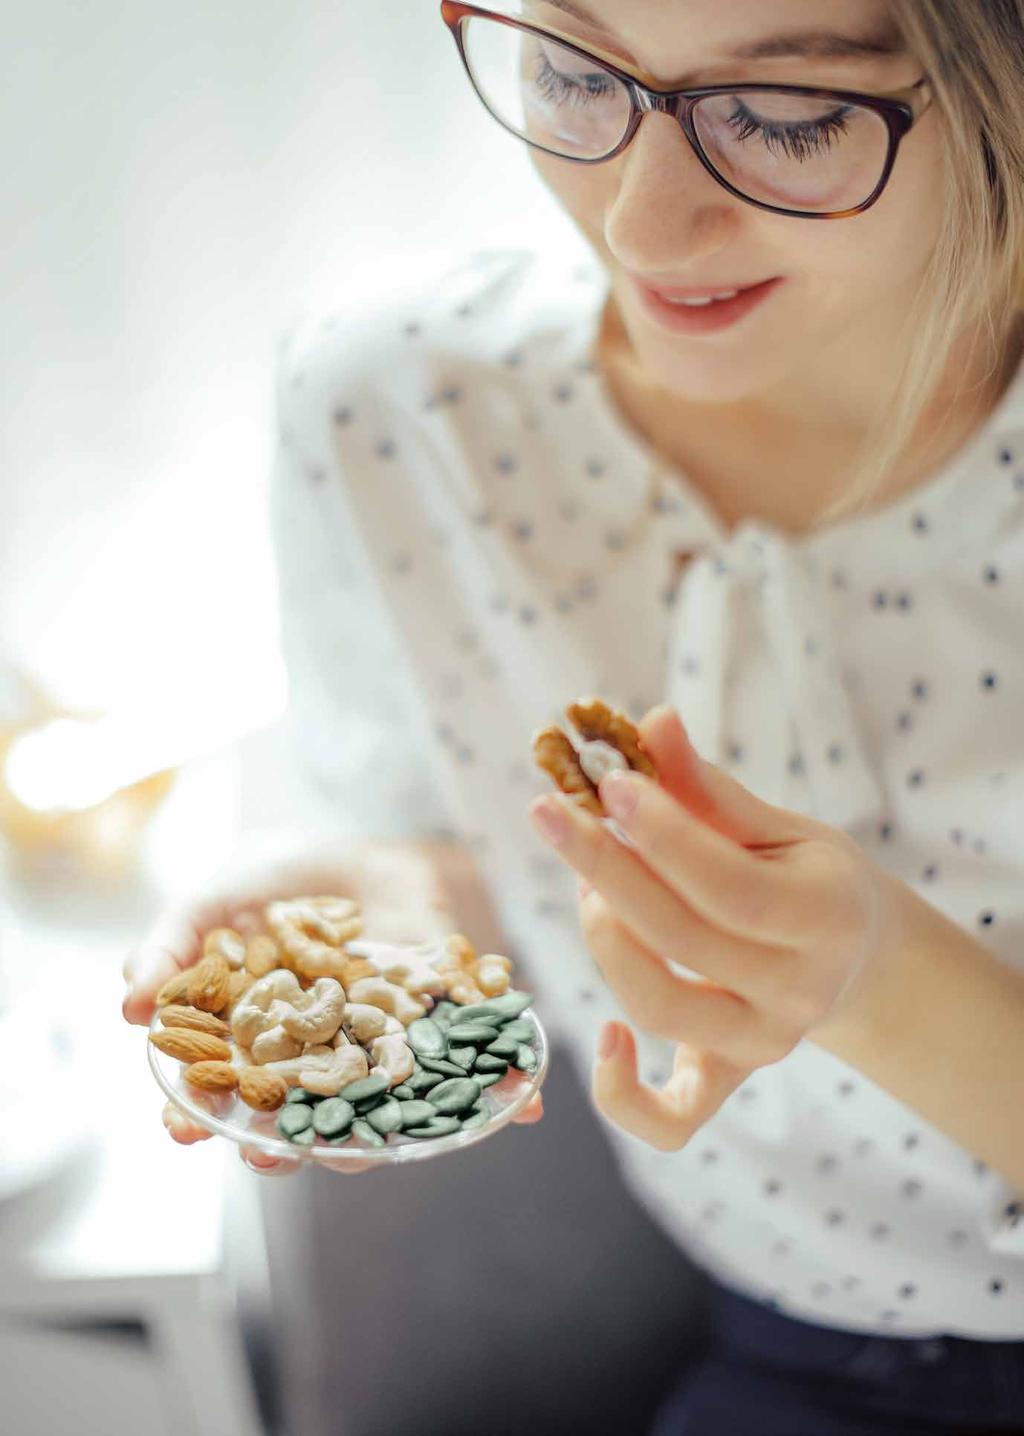 Nuts are refined using many processes and are thus valued all over the world for the ways in which they enrich food either processed as ingredients or in their natural state.